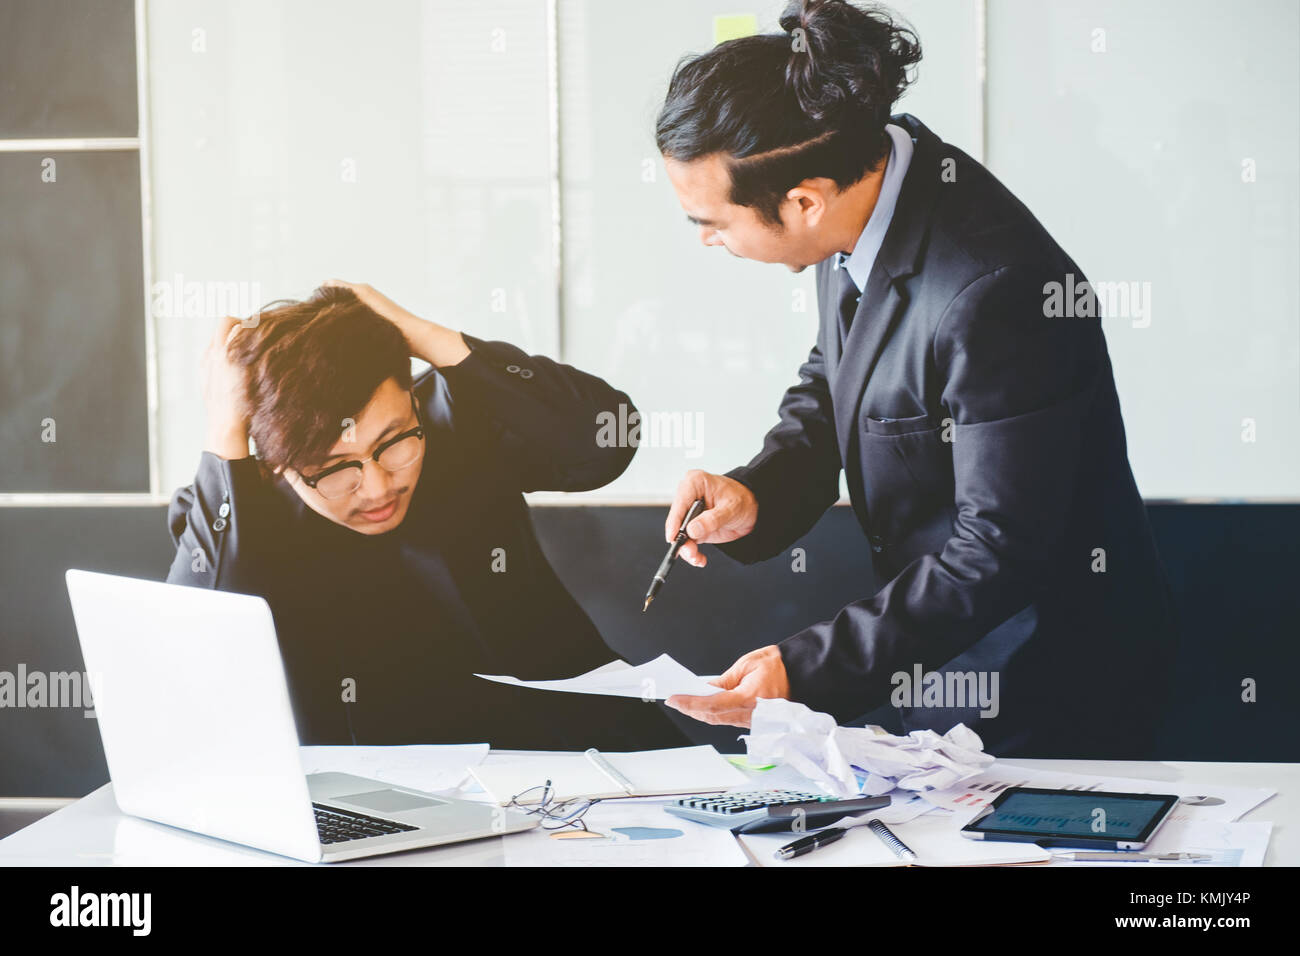 Asian Bad angry boss yelling at business man sad depressed employee reprimand from team leader missed deadline concept Stock Photo